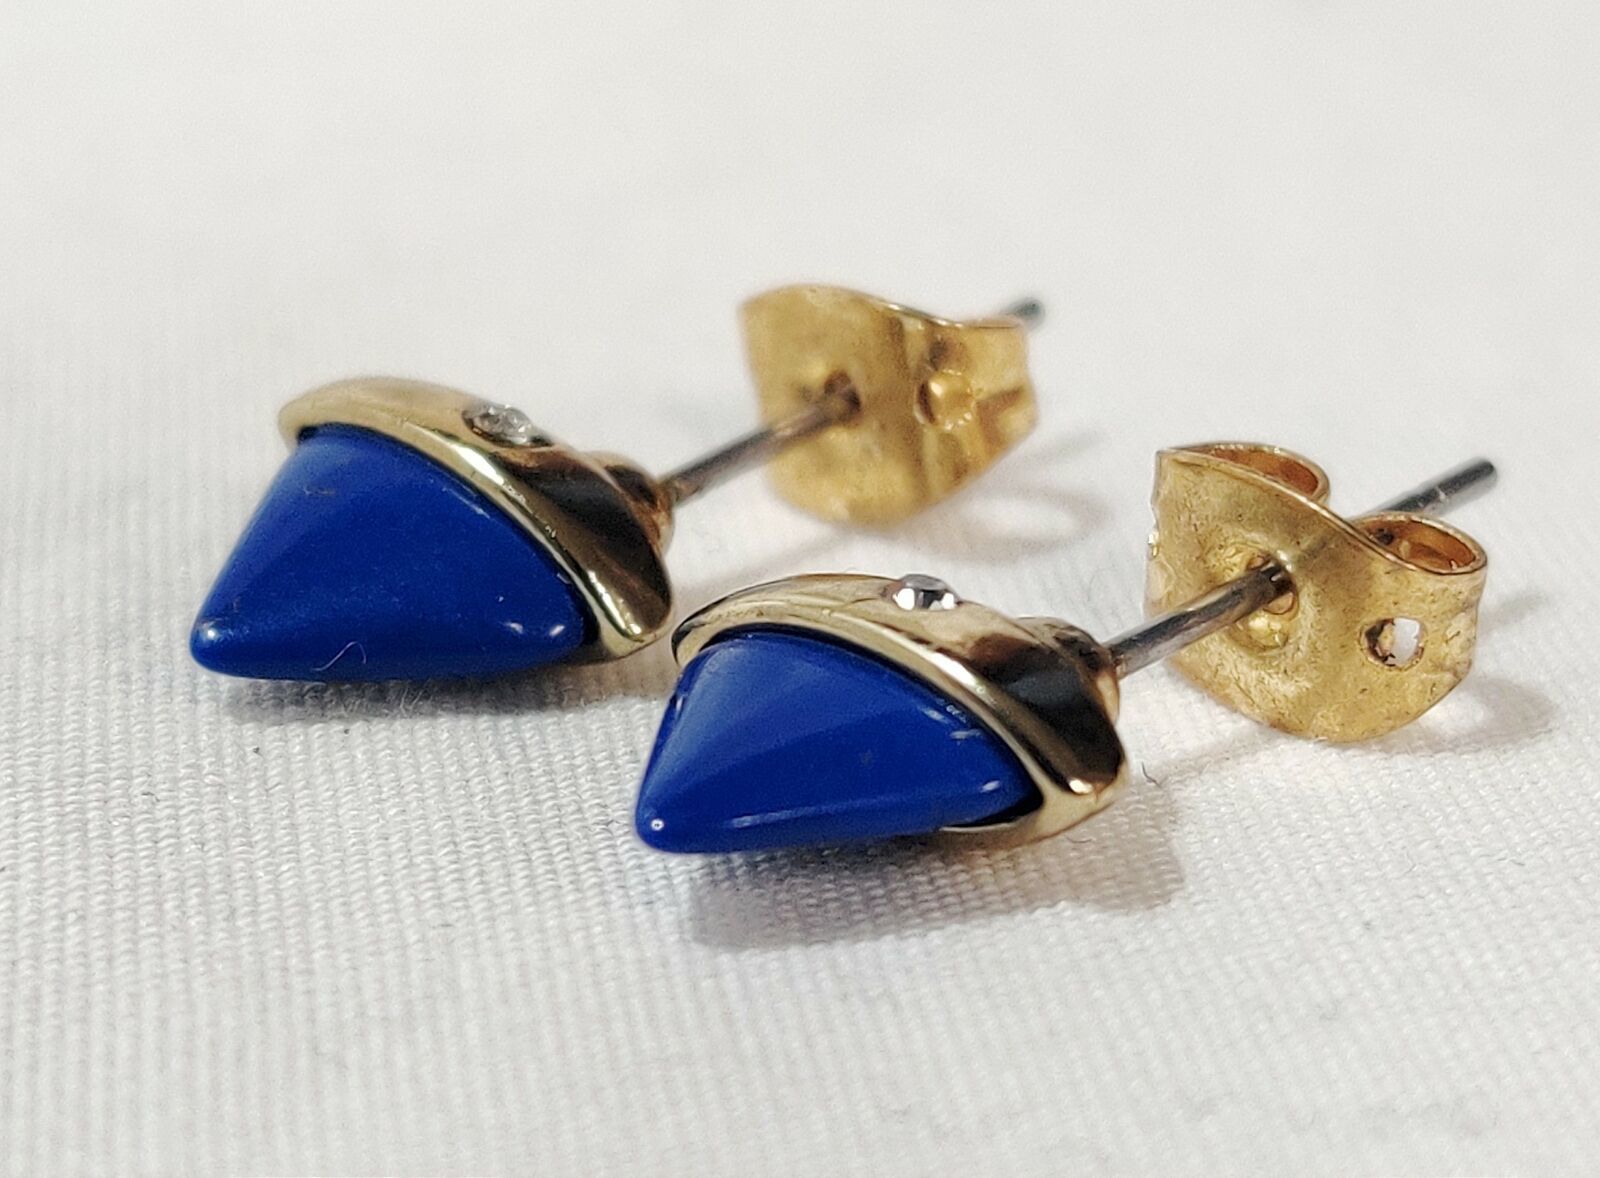 NEW House of Harlow 1960 Faux Lapis Rock Out Stud Earrings (1 pair) gold studs - $34.75